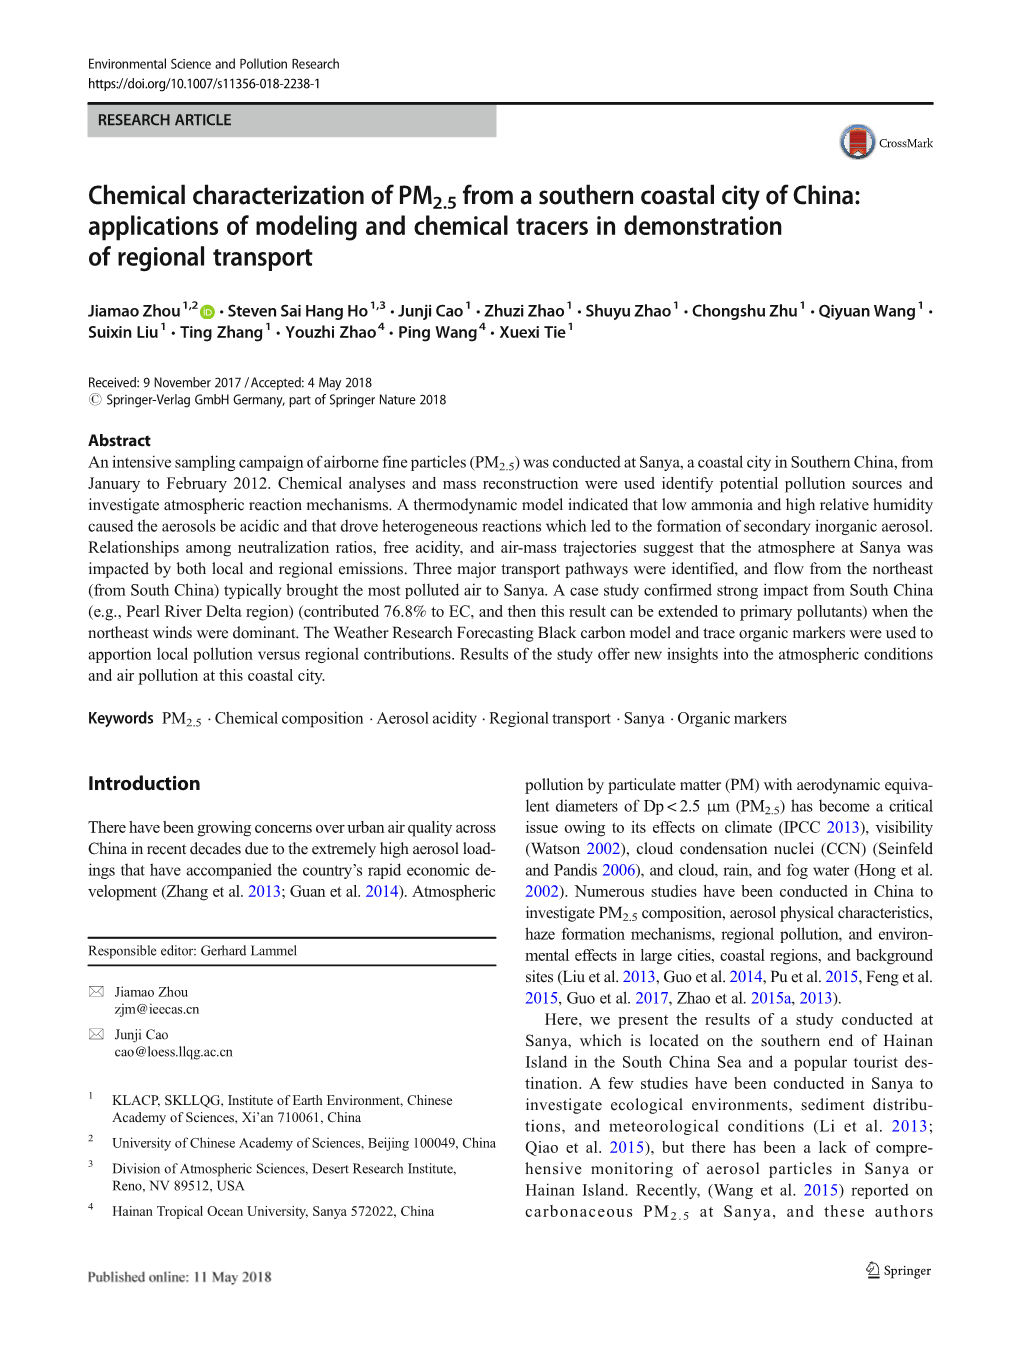 Chemical Characterization of PM2.5 from a Southern Coastal City of China: Applications of Modeling and Chemical Tracers in Demonstration of Regional Transport